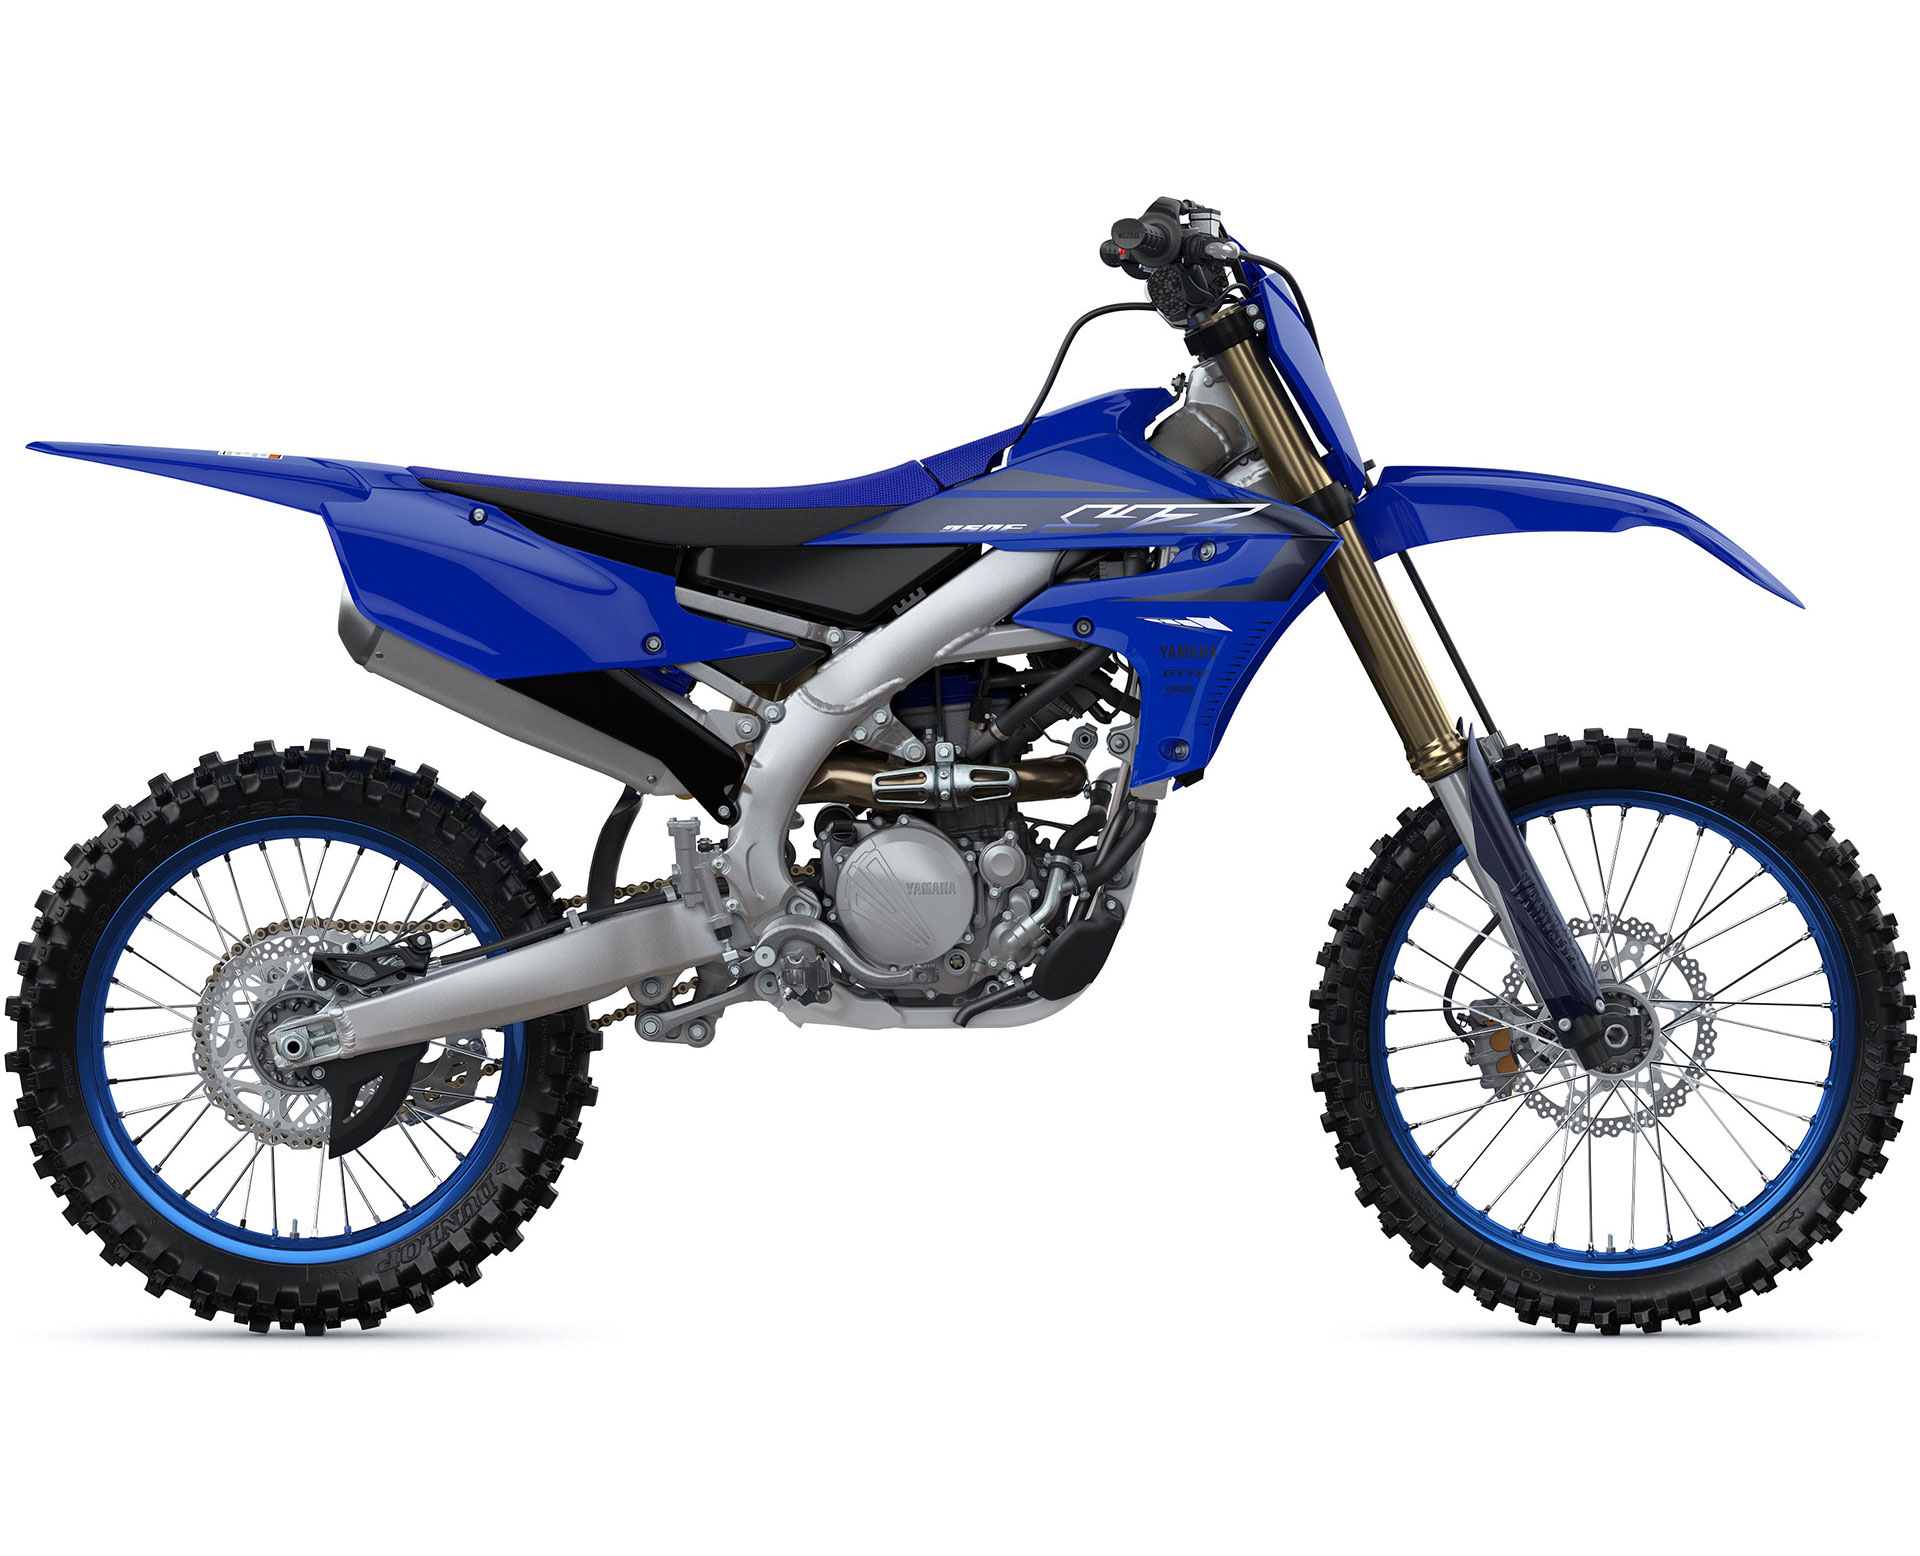 Thumbnail of your customized 2023 YZ250F